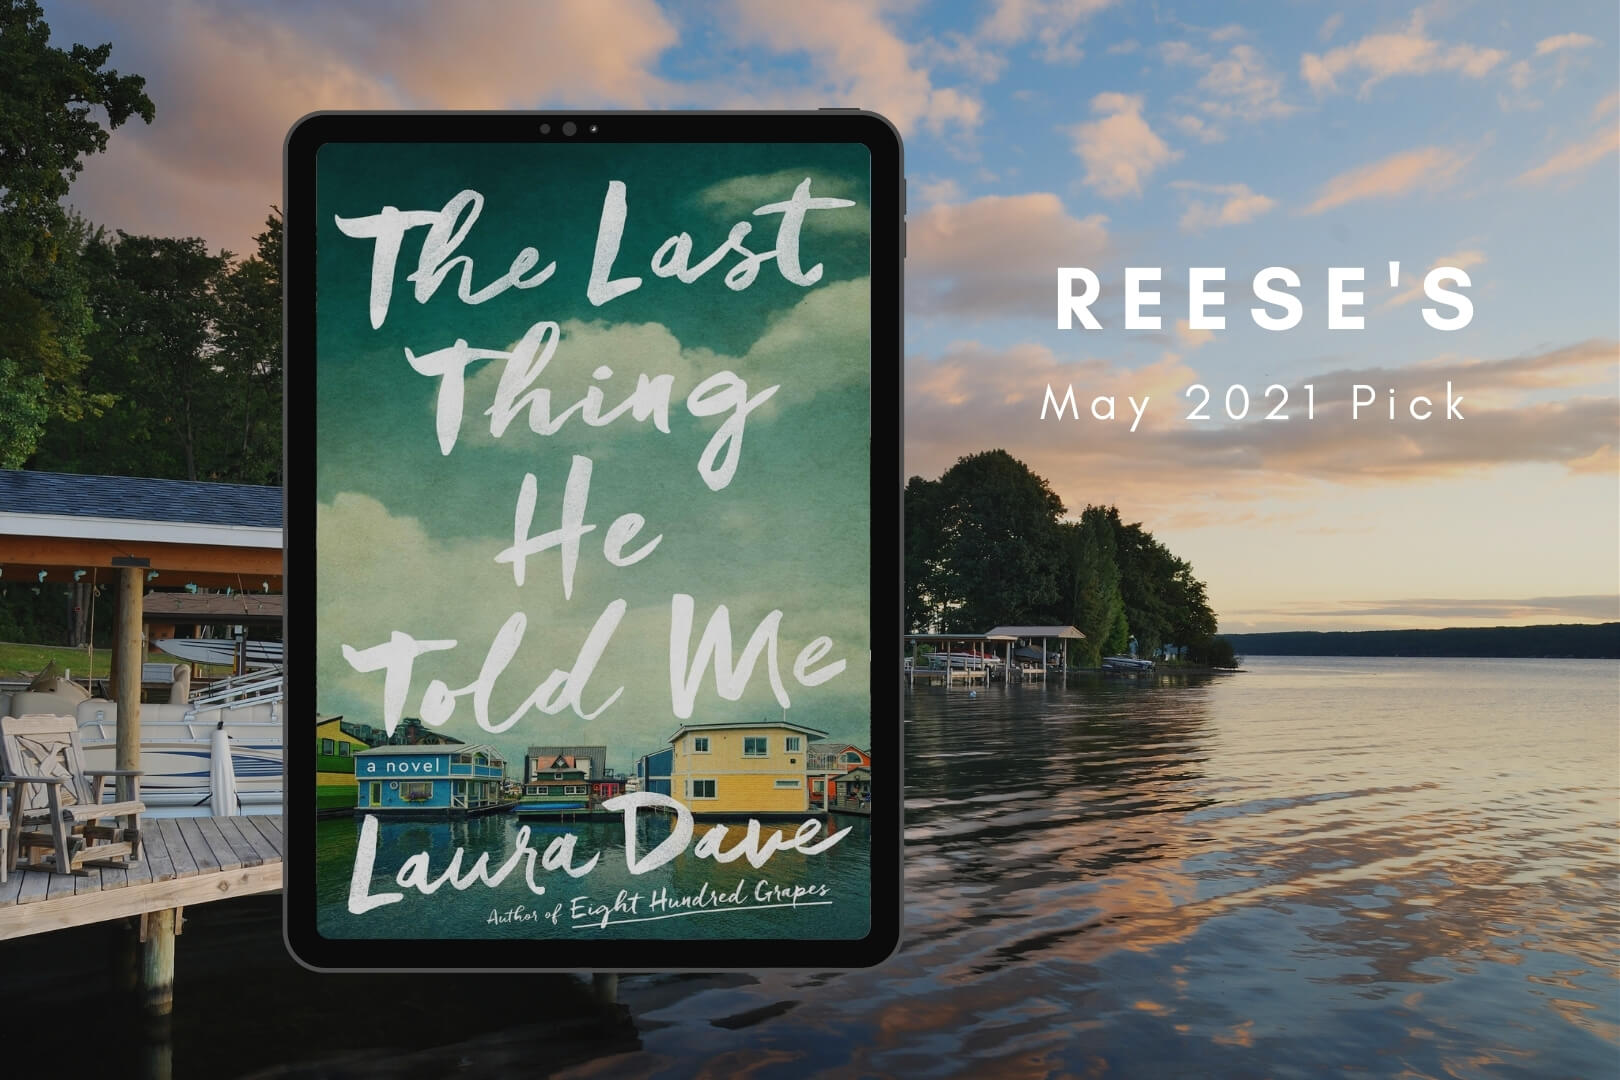 Reese’s May 2021 Book Club Pick is The Last Thing He Told Me by Laura Dave